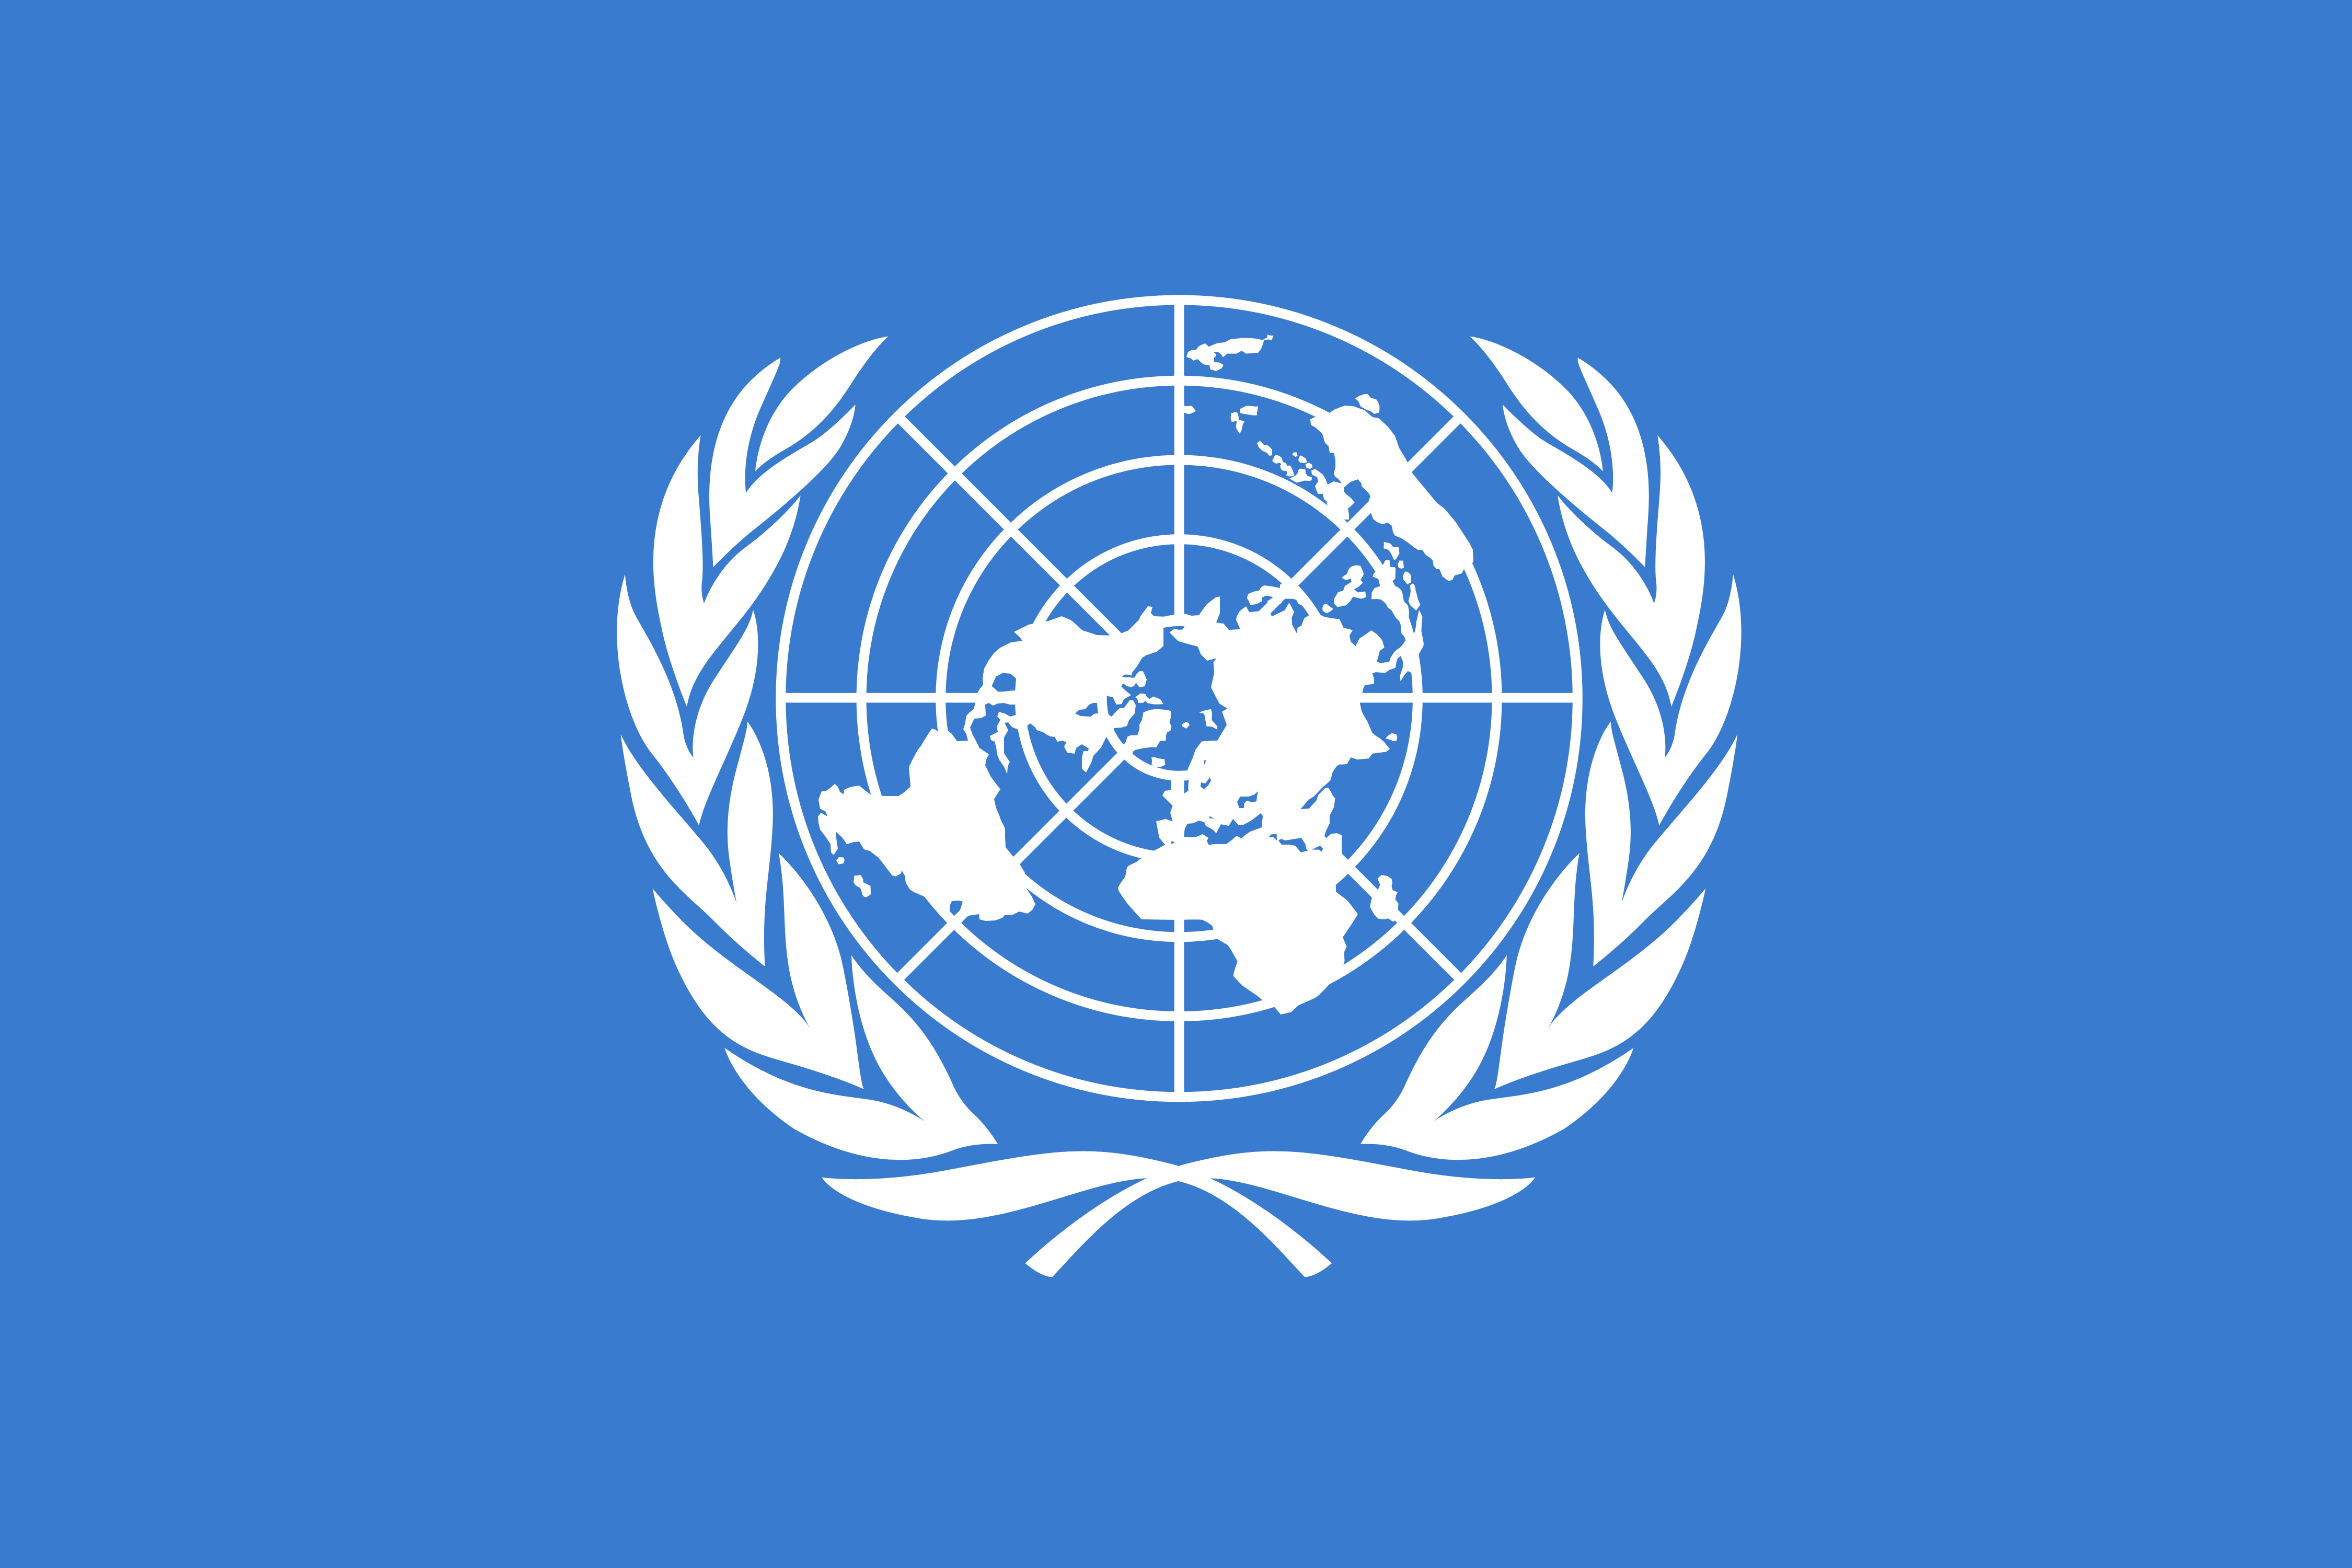 The UN Global Compact is reportedly the world's largest corporate sustainability initiative.